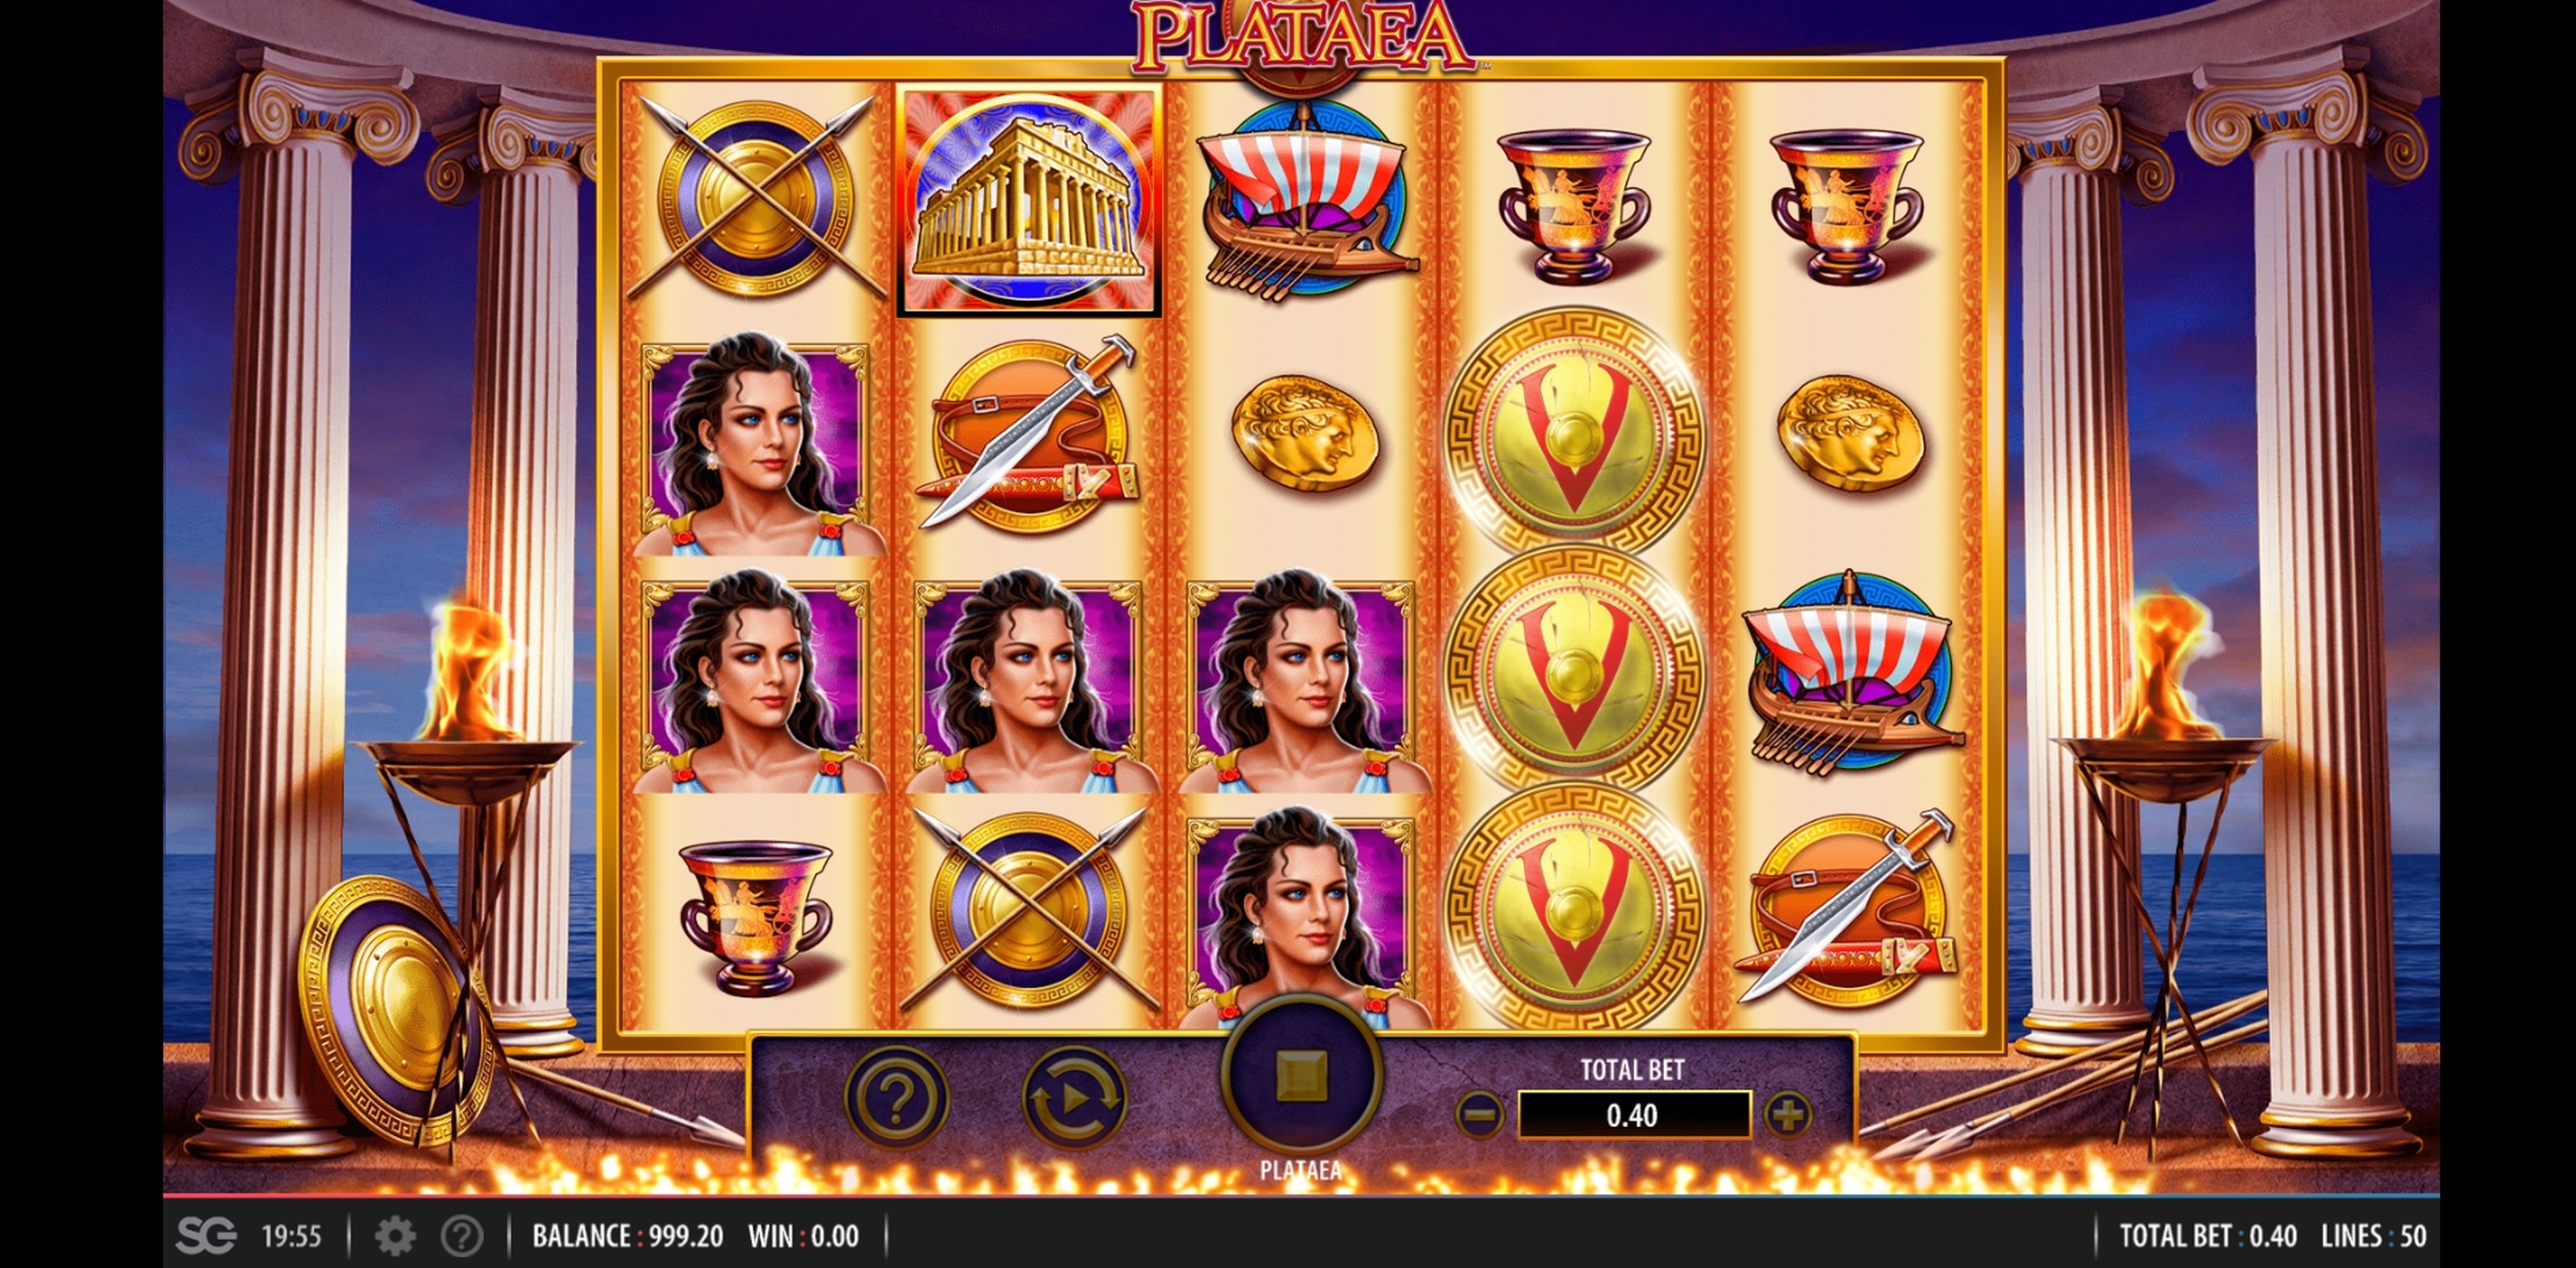 Win Money in Plataea Free Slot Game by WMS